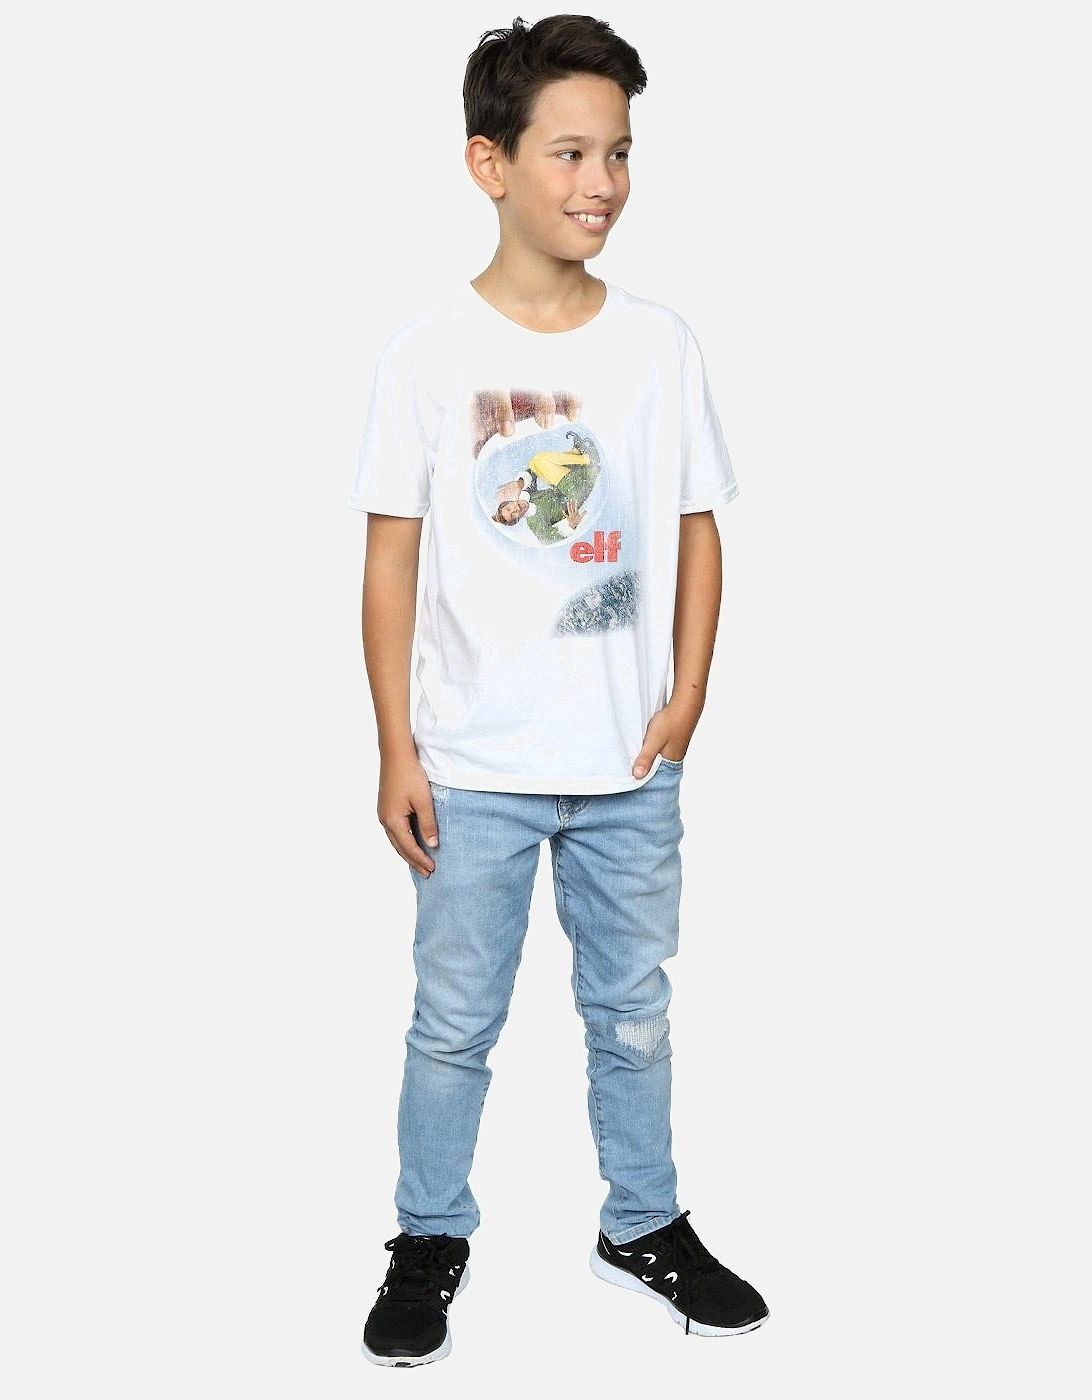 Boys Distressed Poster T-Shirt